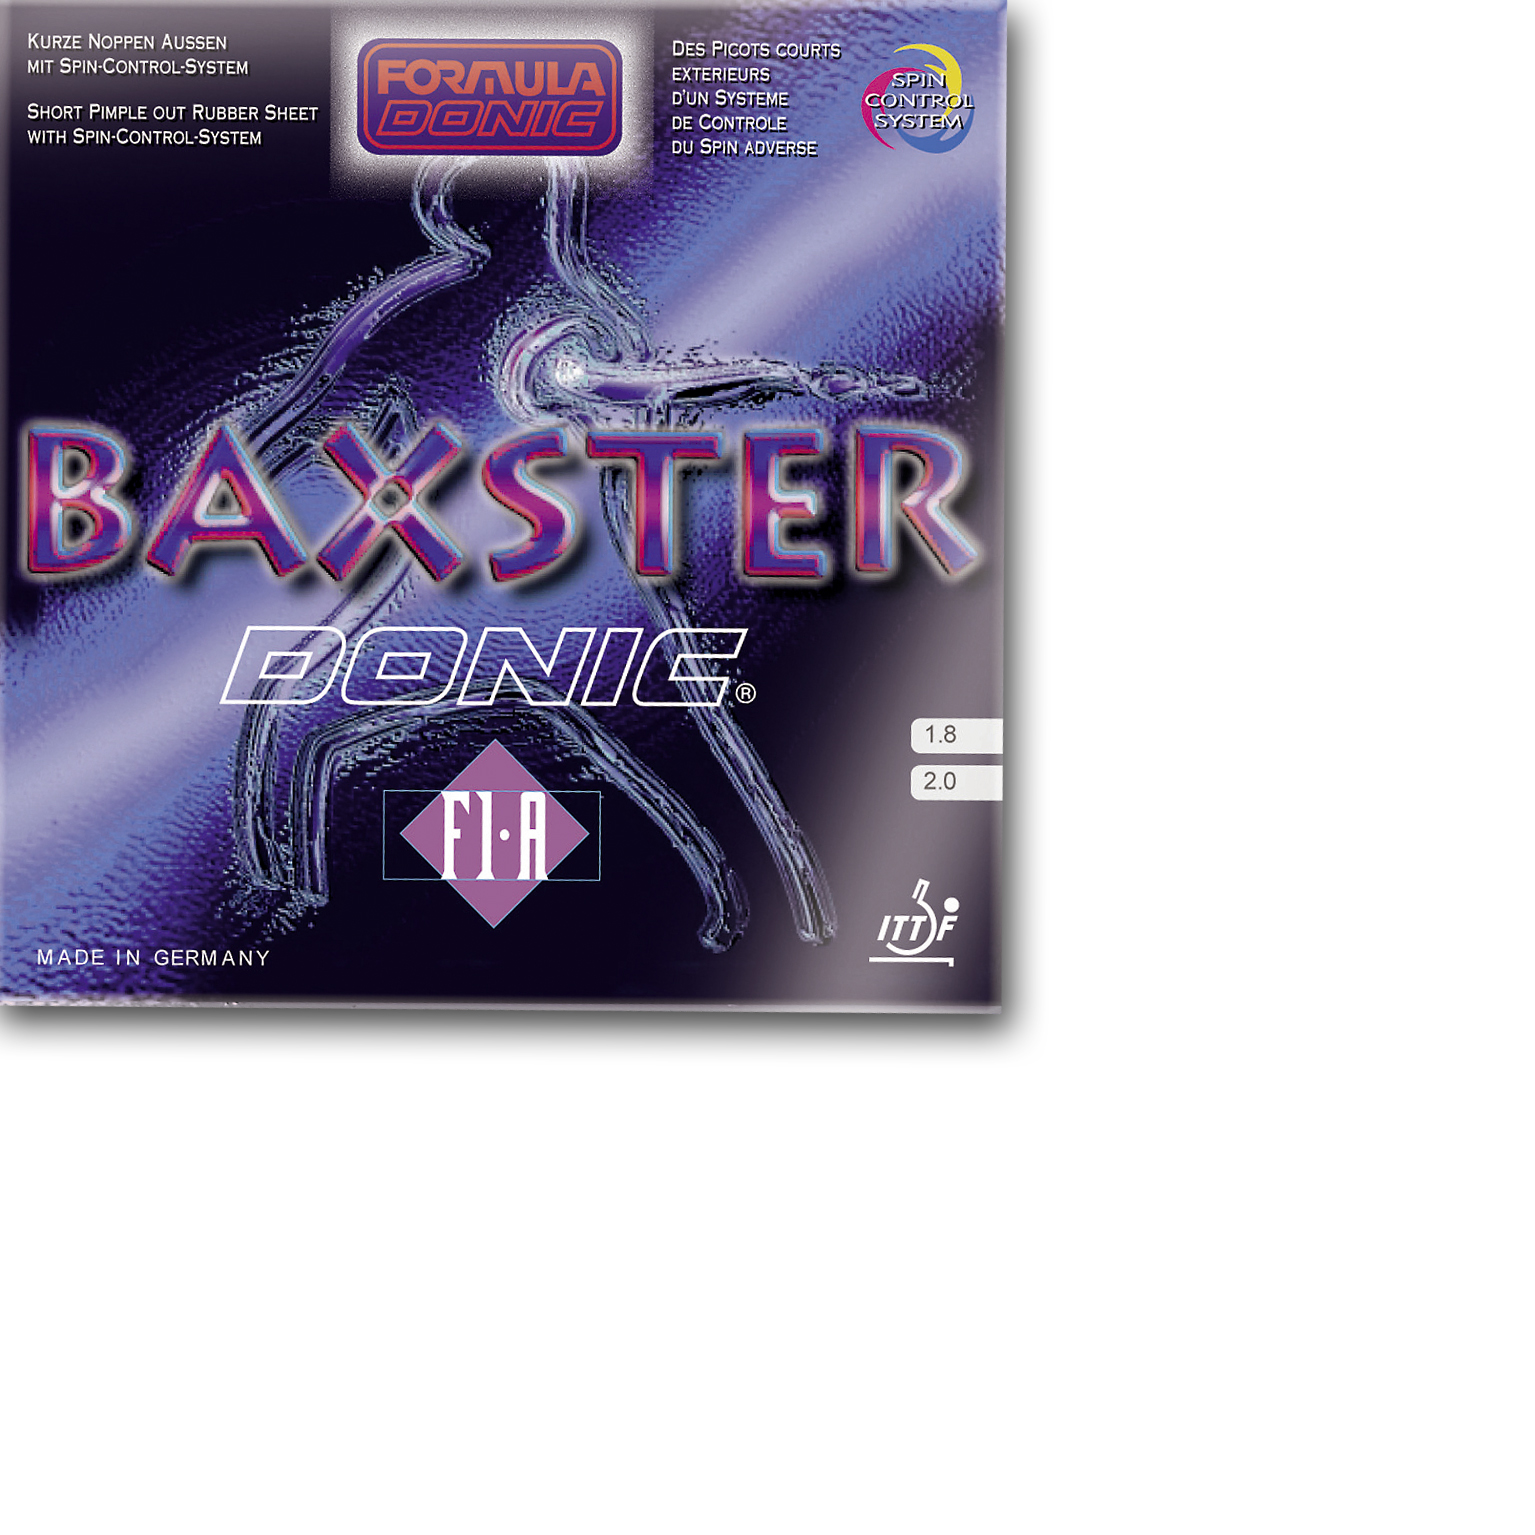 Donic Baxster F1 A von Donic